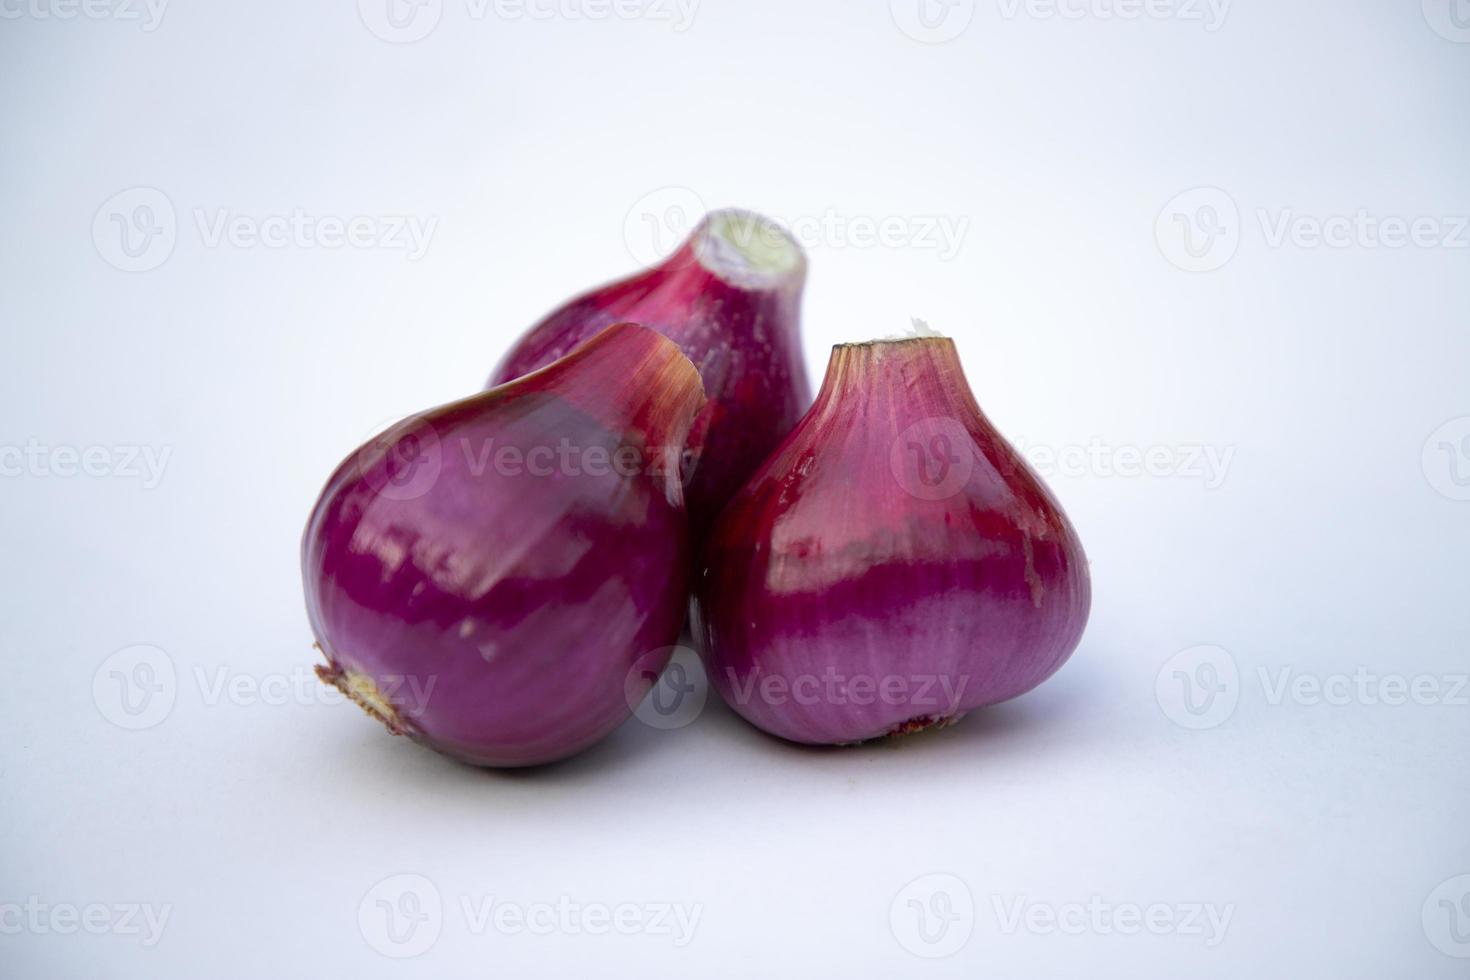 Red onion isolated on white background close up photo shoot